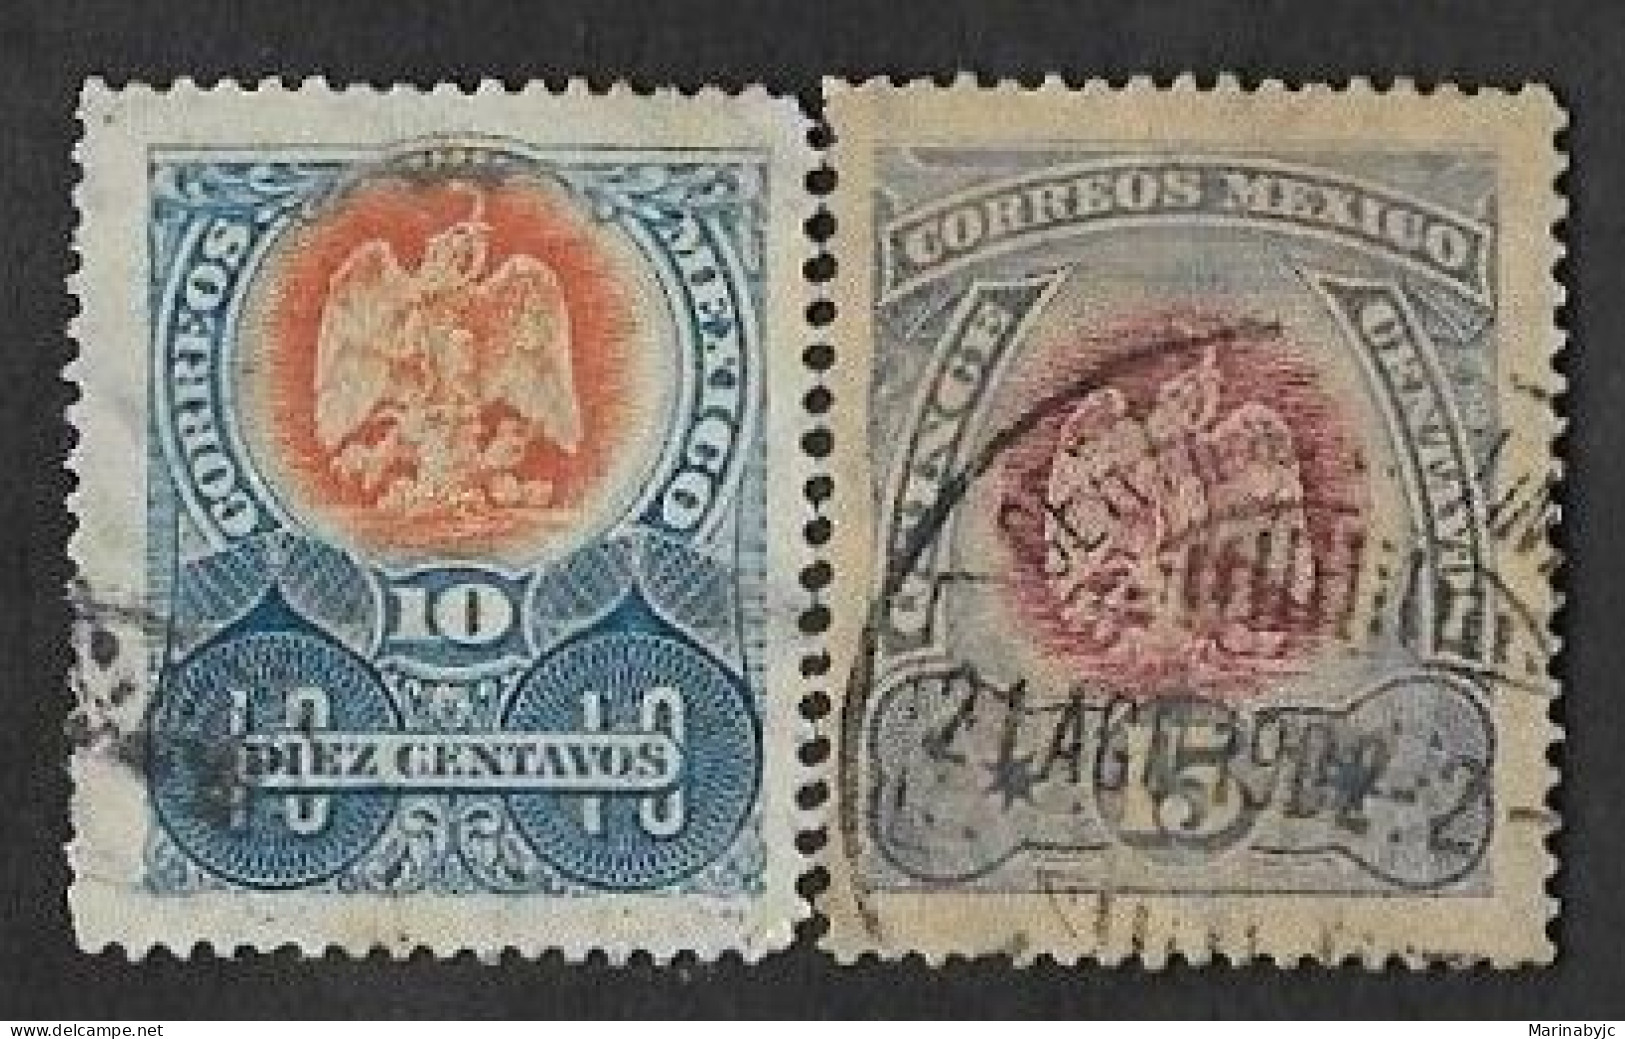 SE)1899 MEXICO COAT OF ARMS, AGUILITA 10C SCT 298 & 15C SCT 299, USED - Mexico